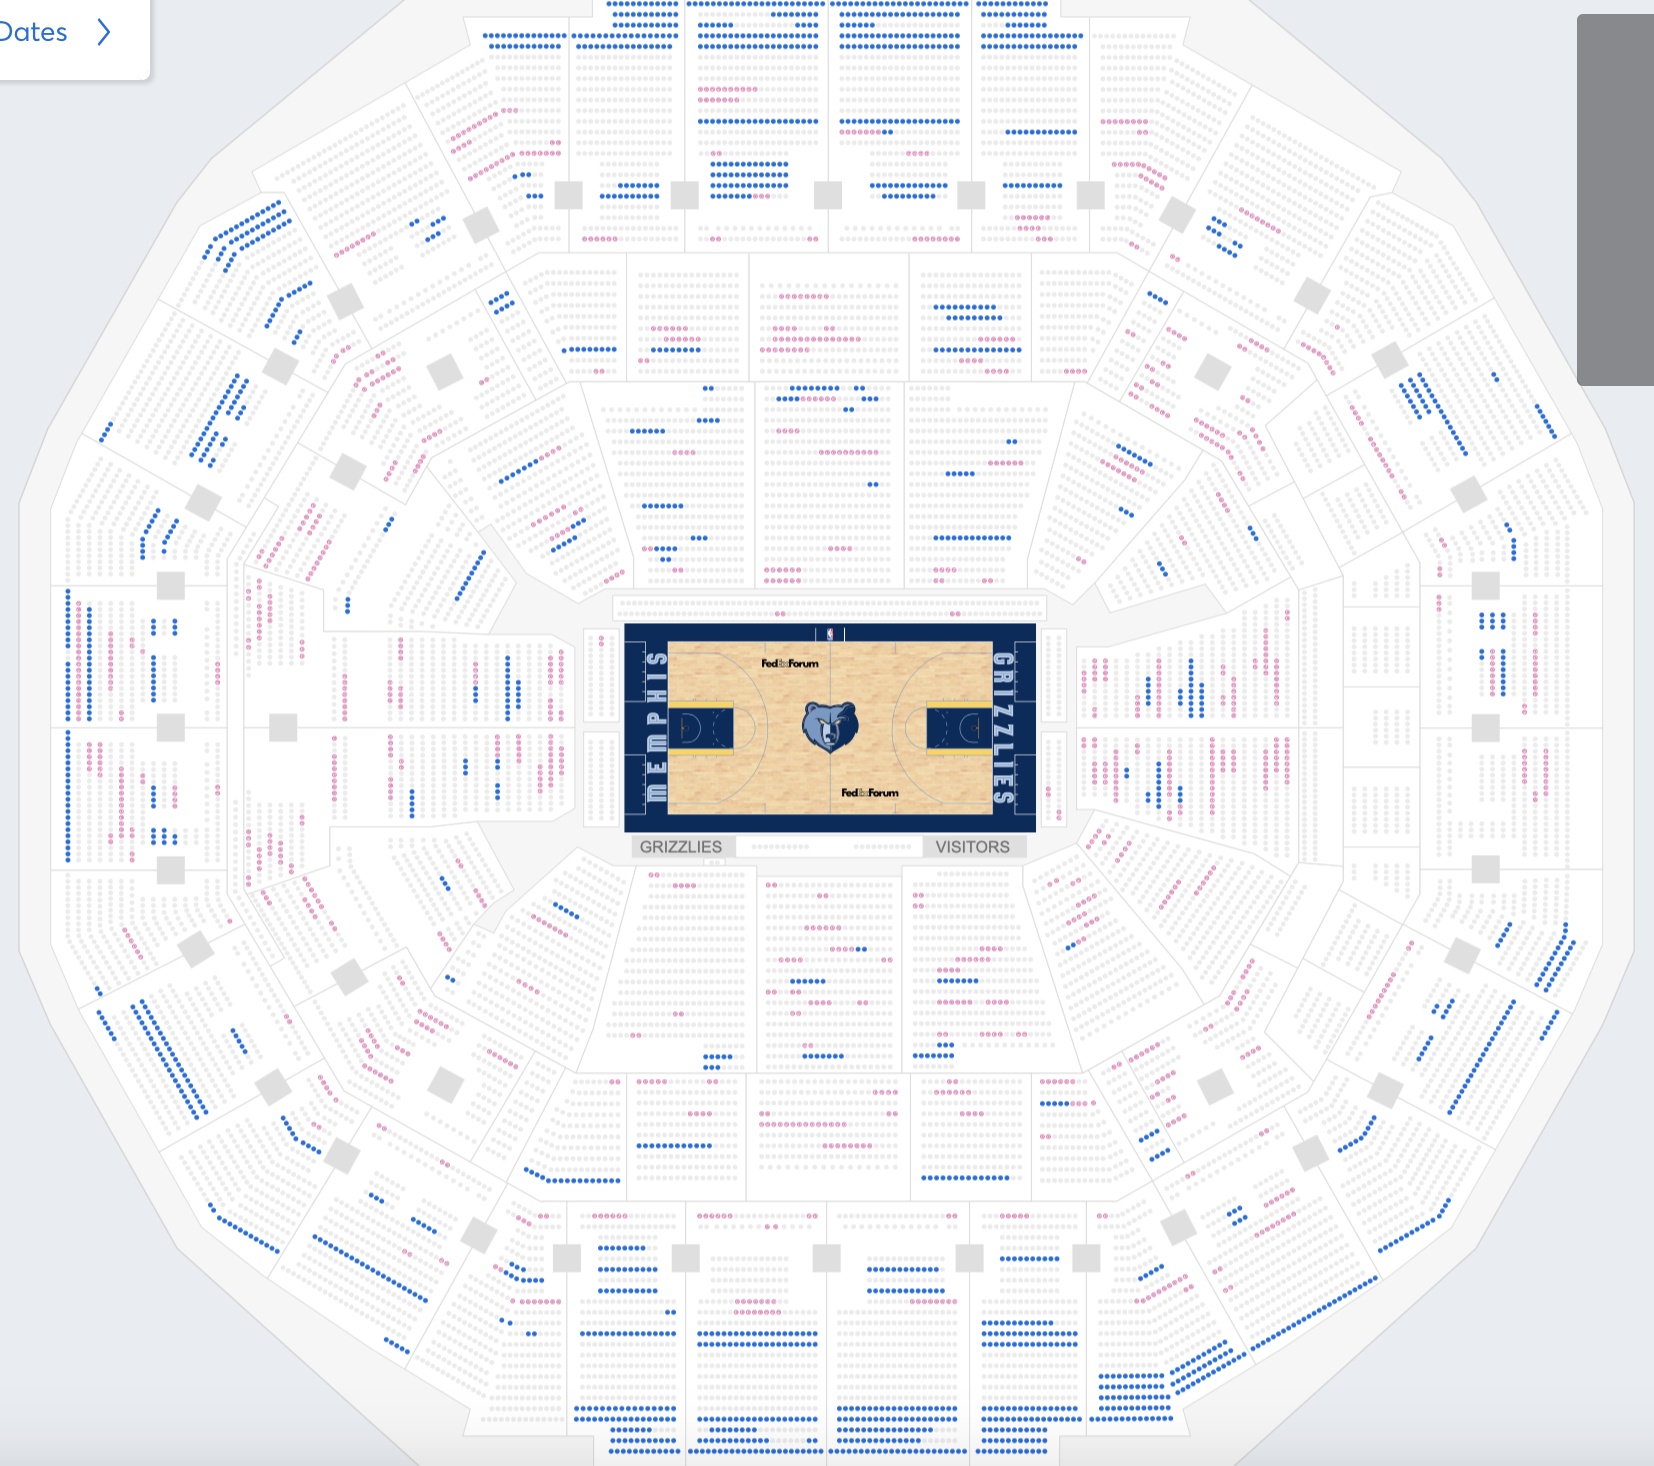 Memphis Grizzlies Tickets Seating Chart